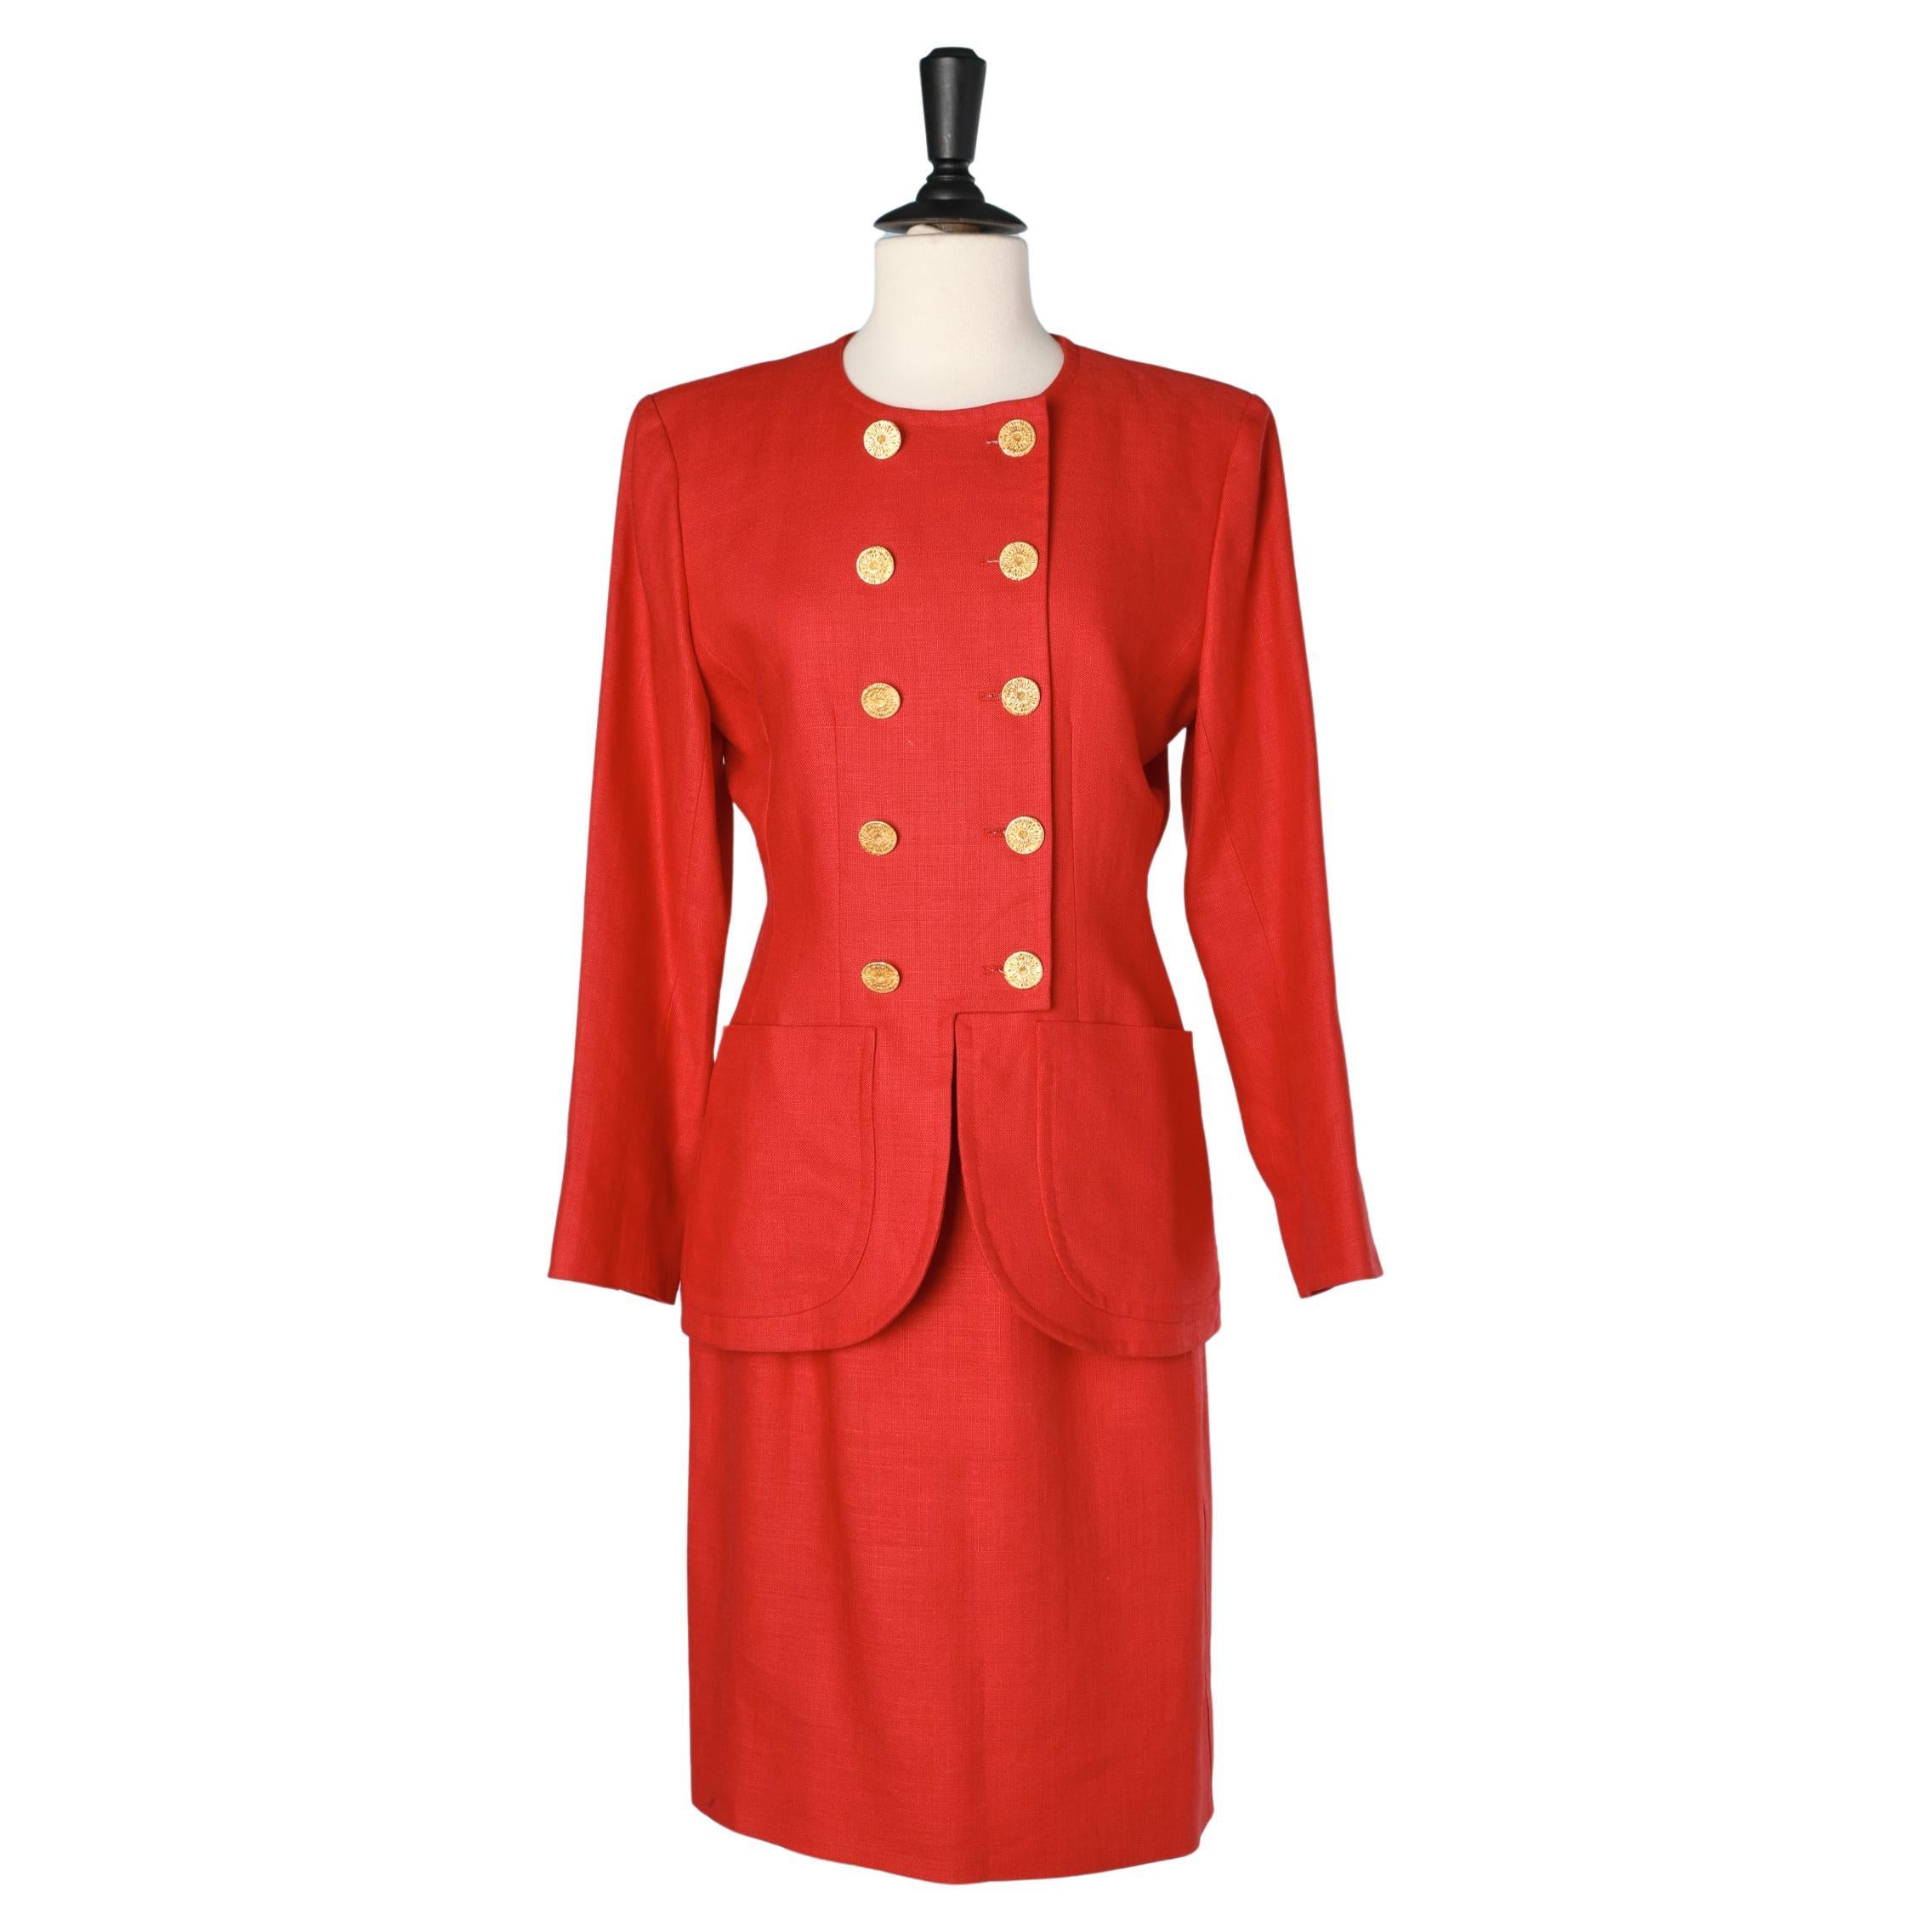 Red linen skirt-suit with jewlerry buttons Yves Saint Laurent Rive Gauche SS1992 For Sale